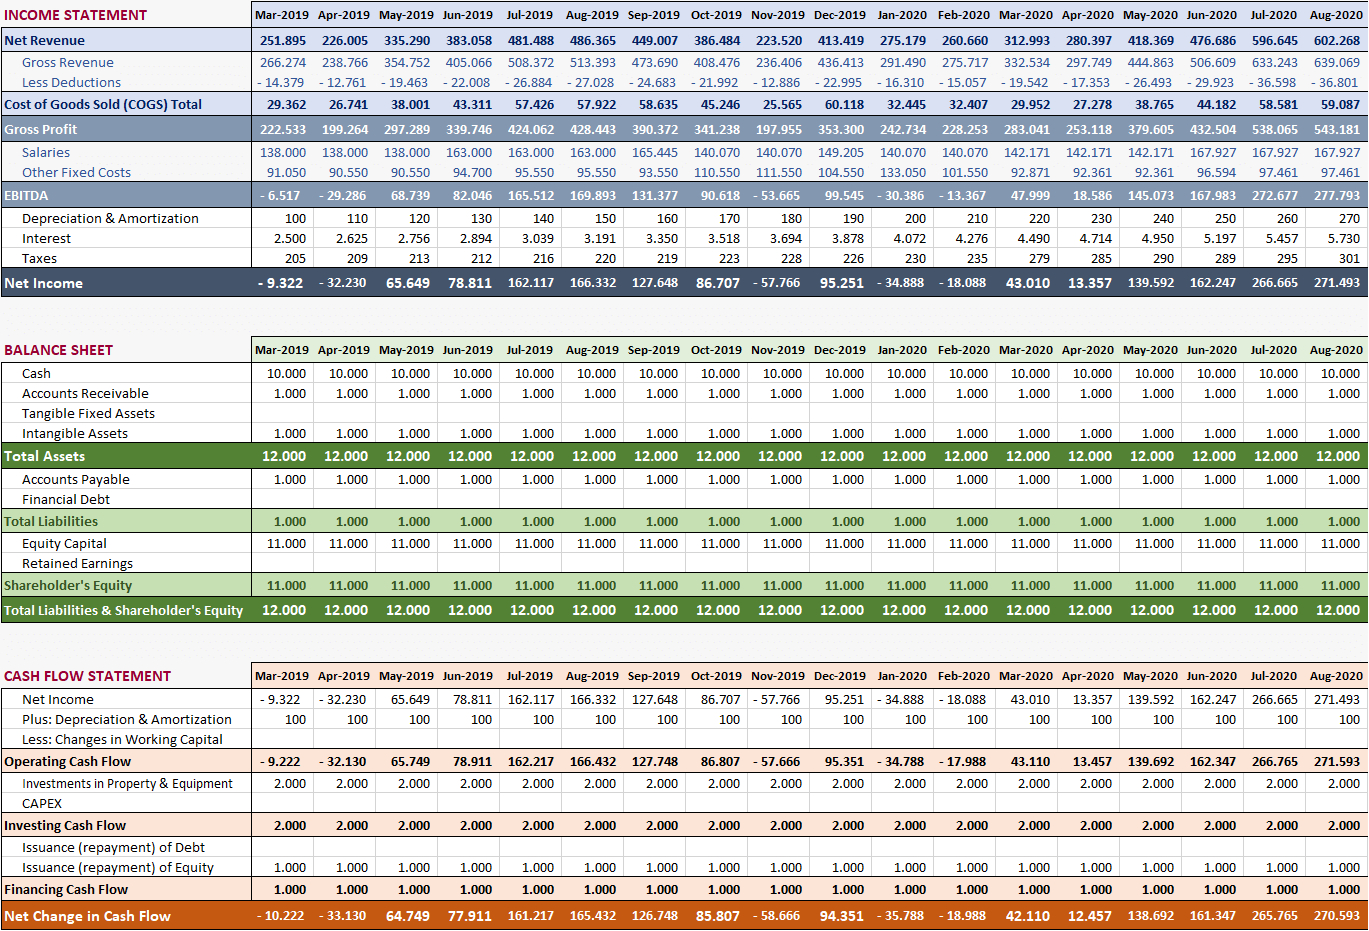 Hotel Financial Model For Financial Reporting Templates In Excel